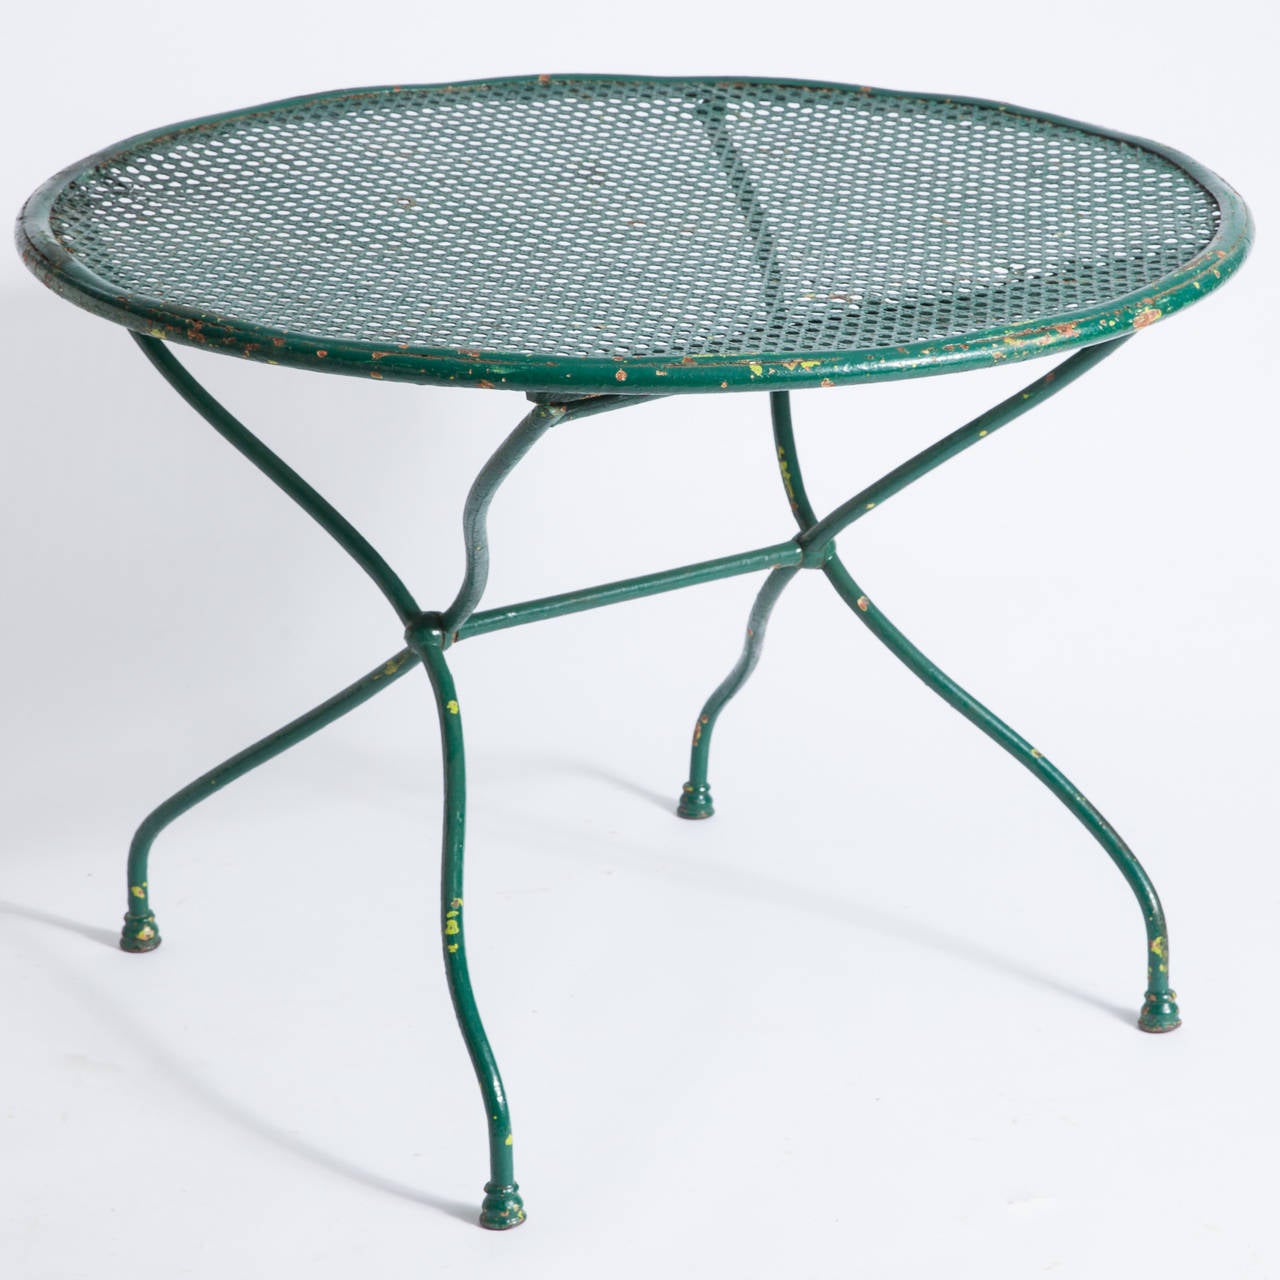 This French early 20th century antique garden set consists of a round table with four matching chairs. It is in very good condition. The green paint reveals bits of previous paint underneath giving it a wonderful patina. The chairs with unusual